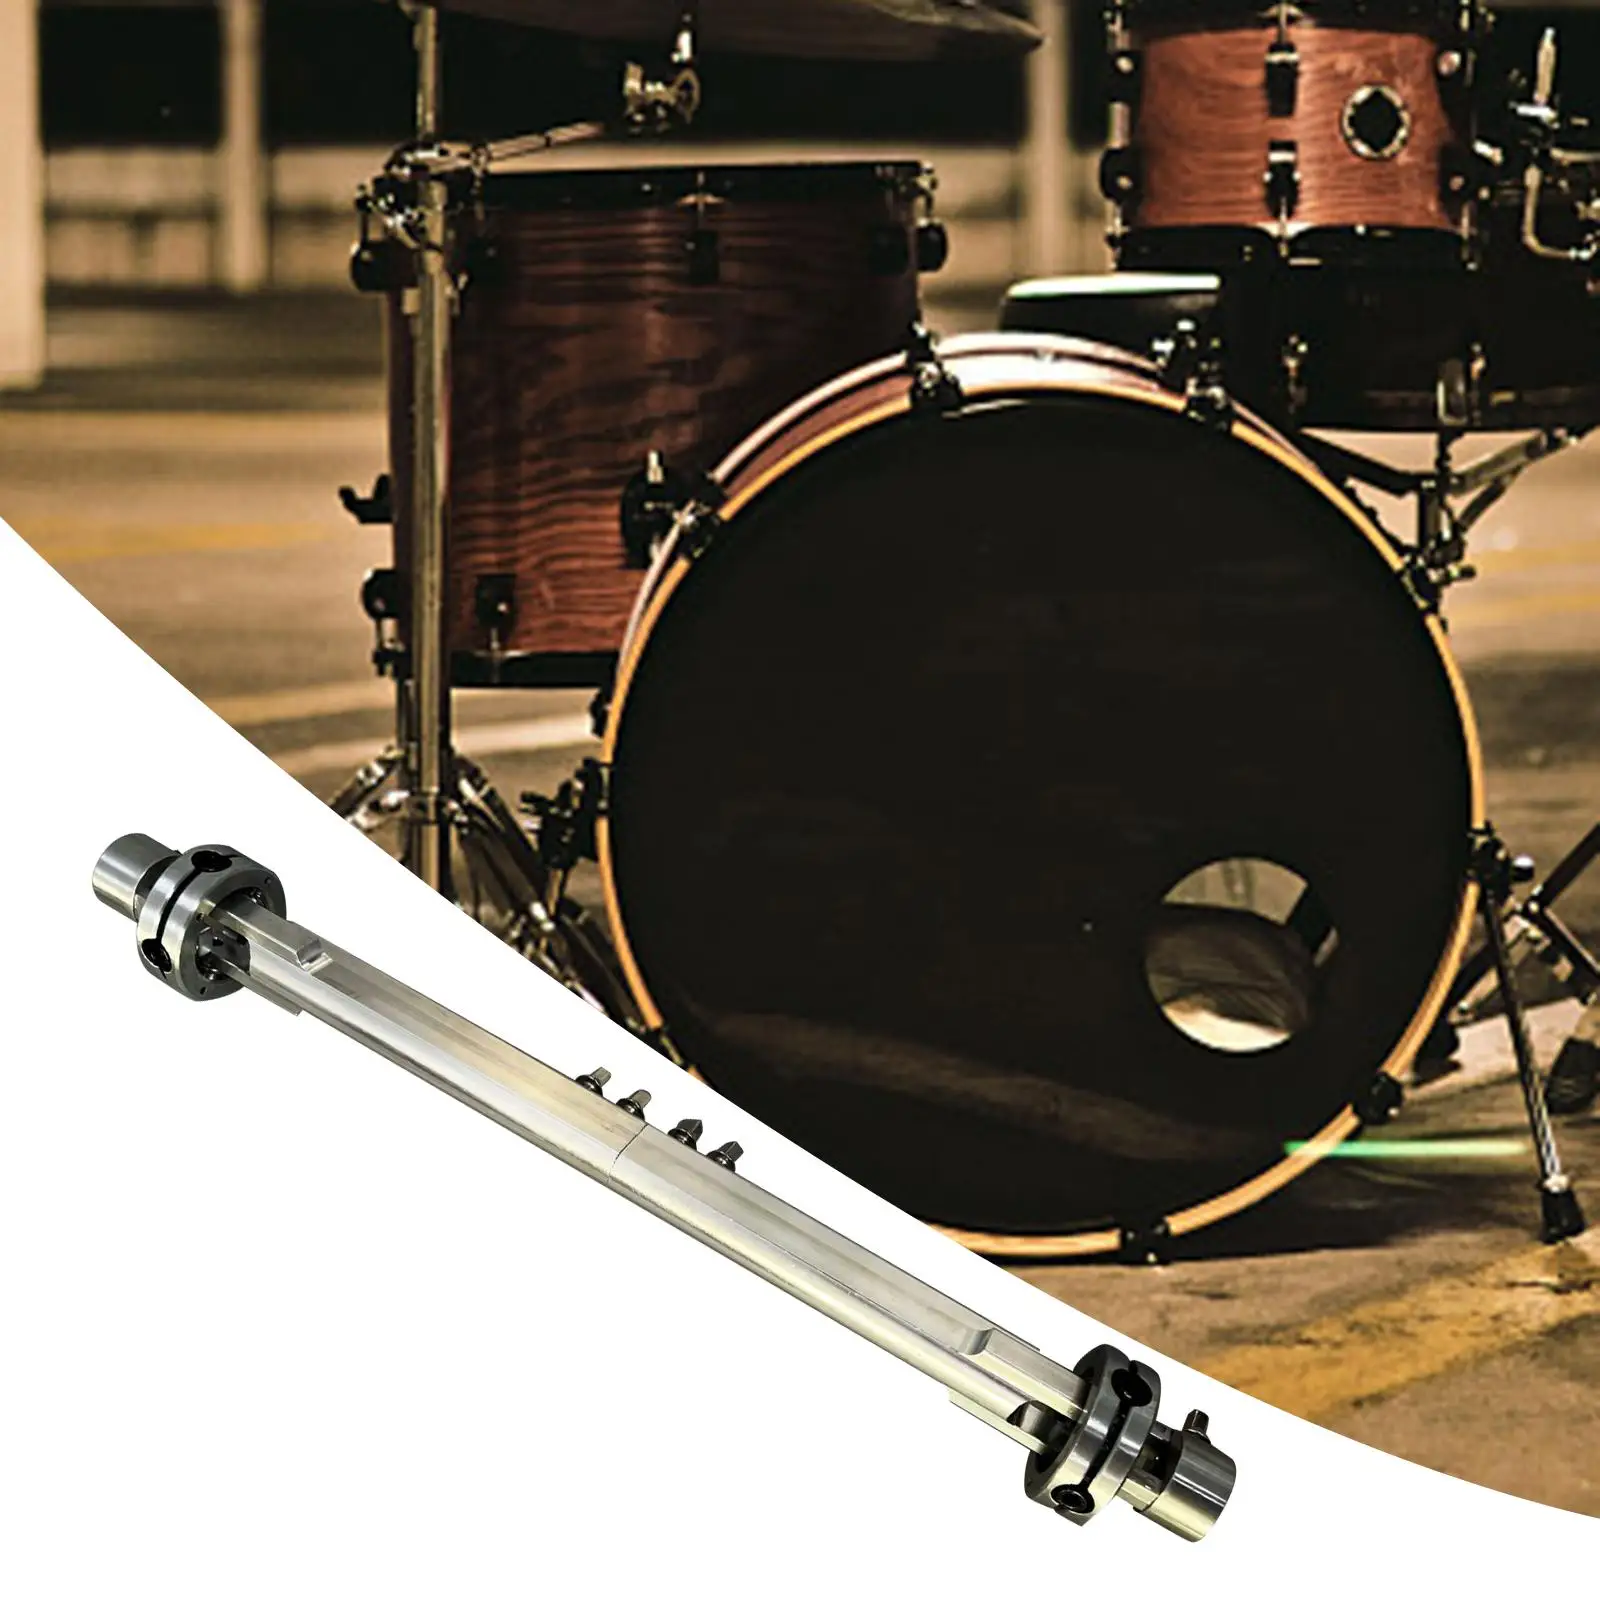 Heavy Duty Double Bass Drum Linkage Tight Connection Percussion Instrument Accessory Adjustable Parts